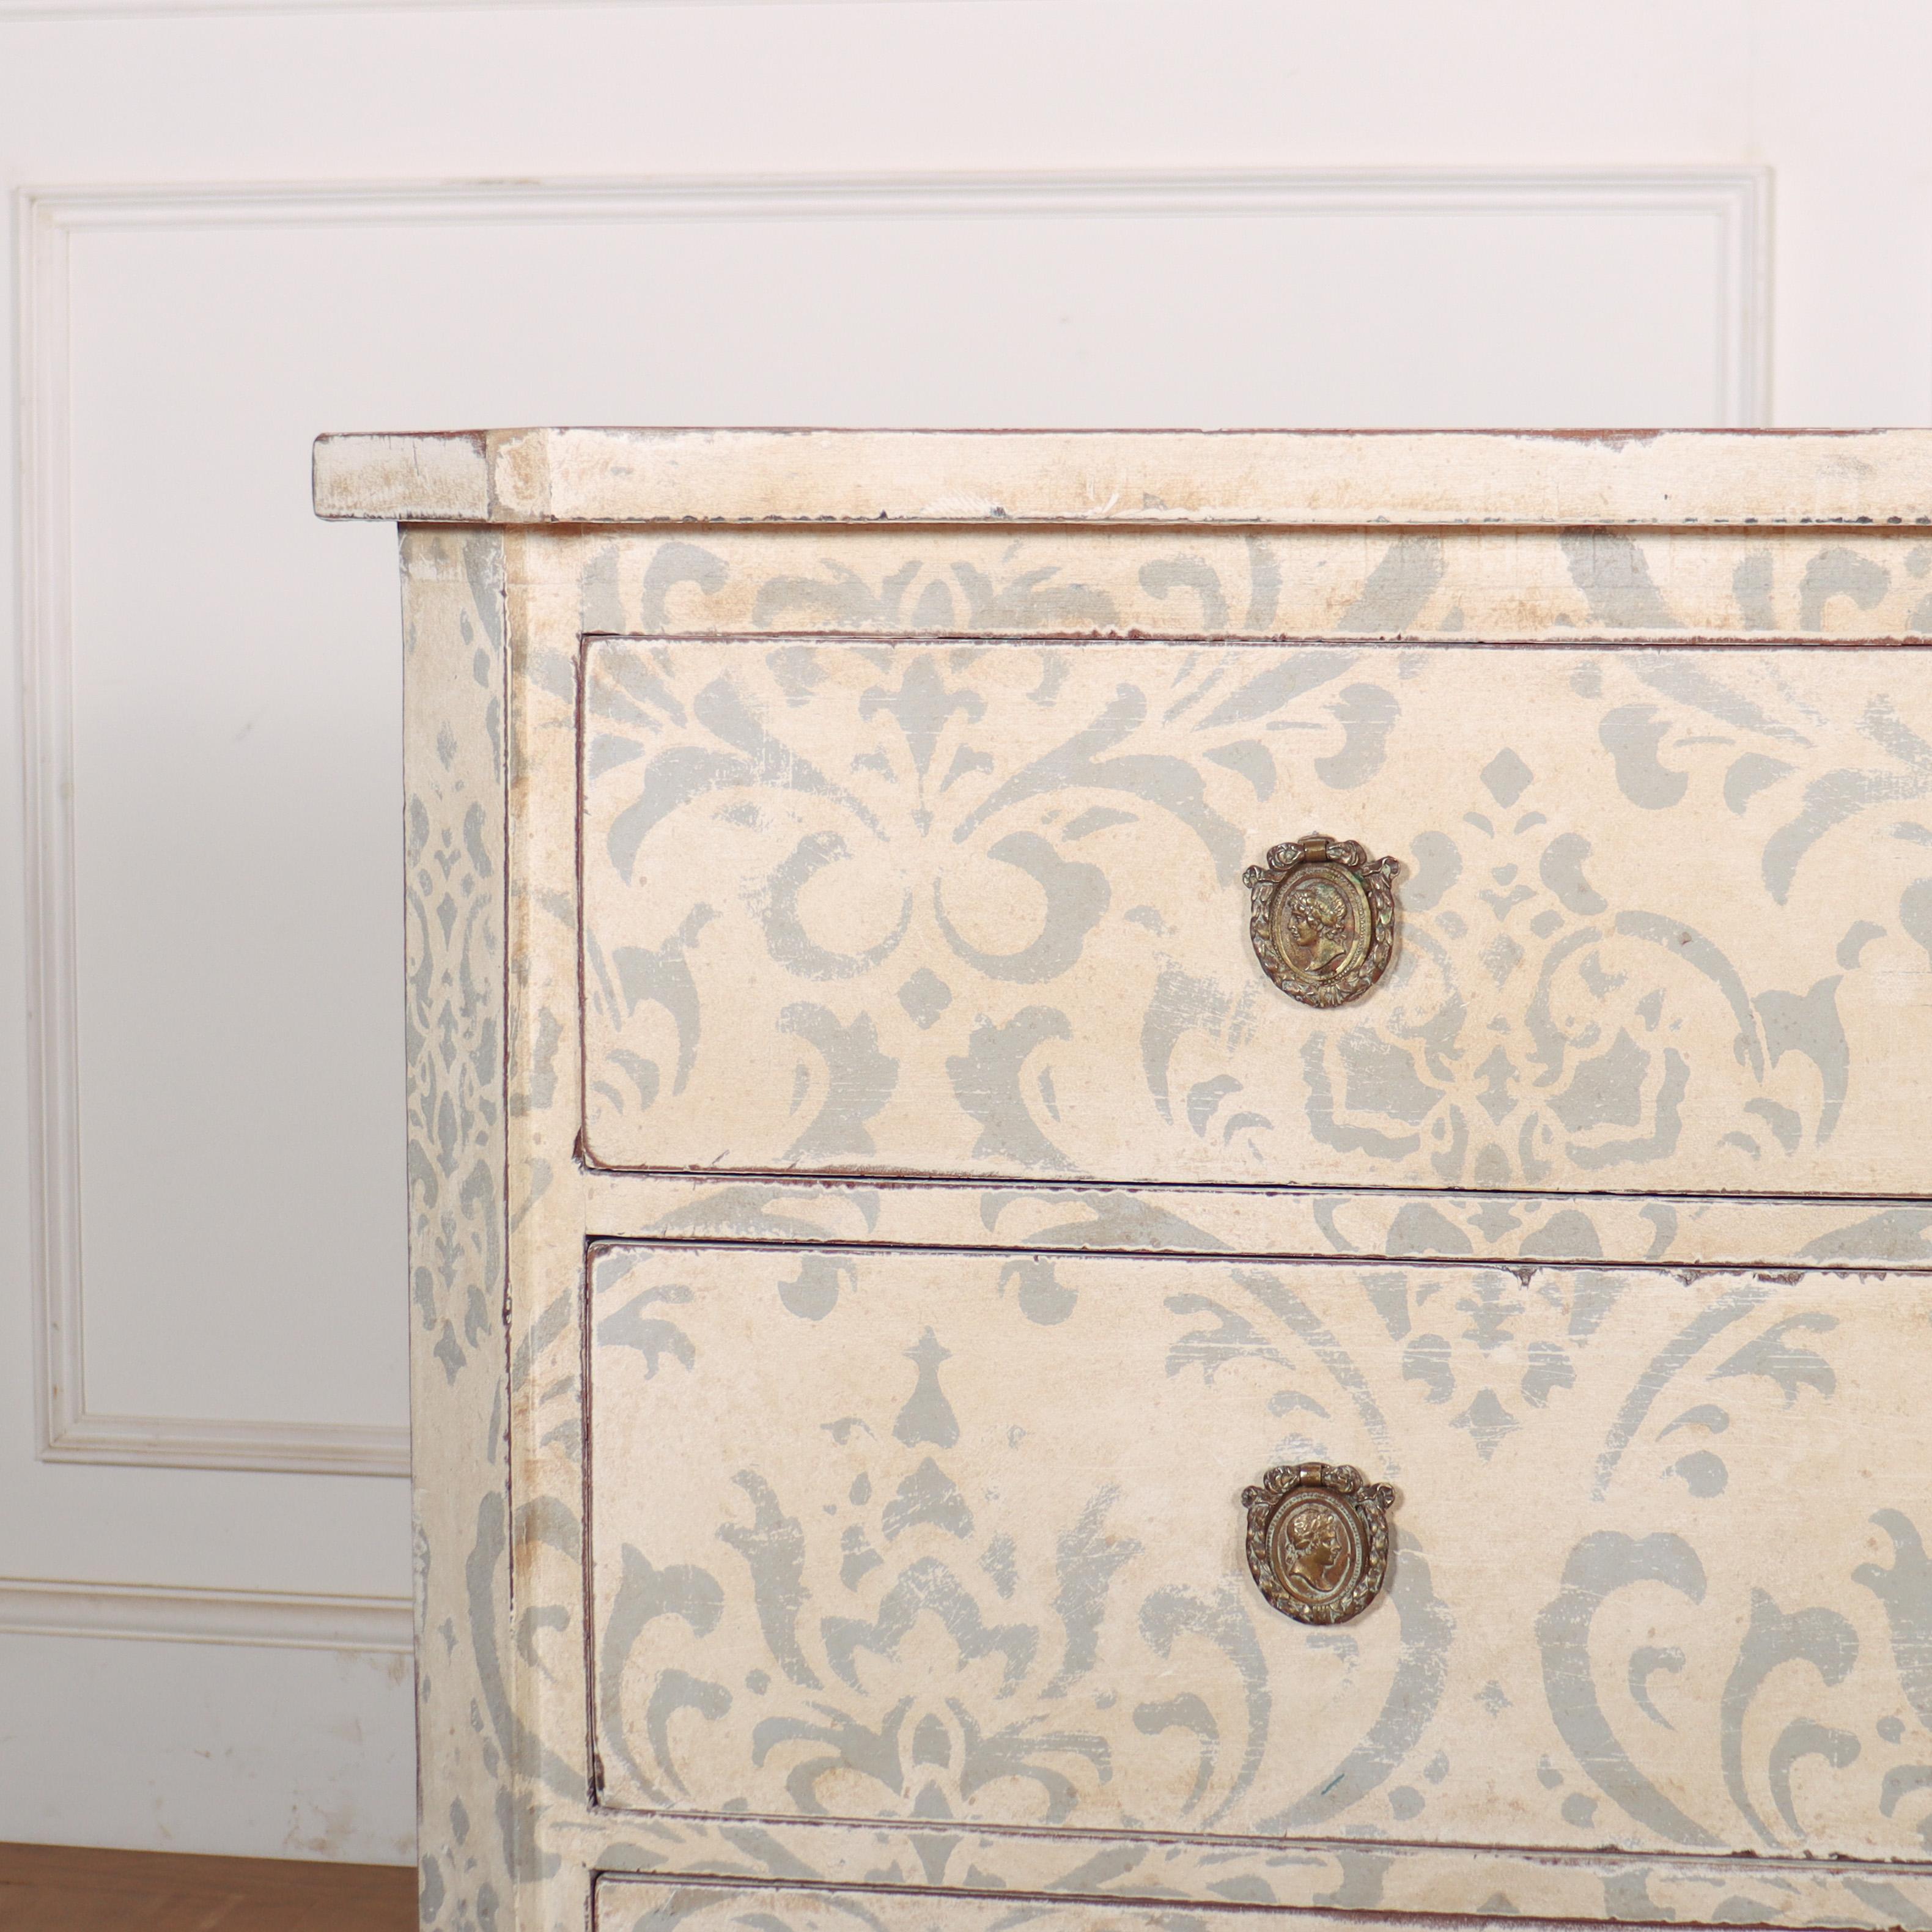 Early 19th C decorated Swedish three drawer painted pine commode. 1820.

Reference: 8390

Dimensions
44.5 inches (113 cms) Wide
20.5 inches (52 cms) Deep
34.5 inches (88 cms) High